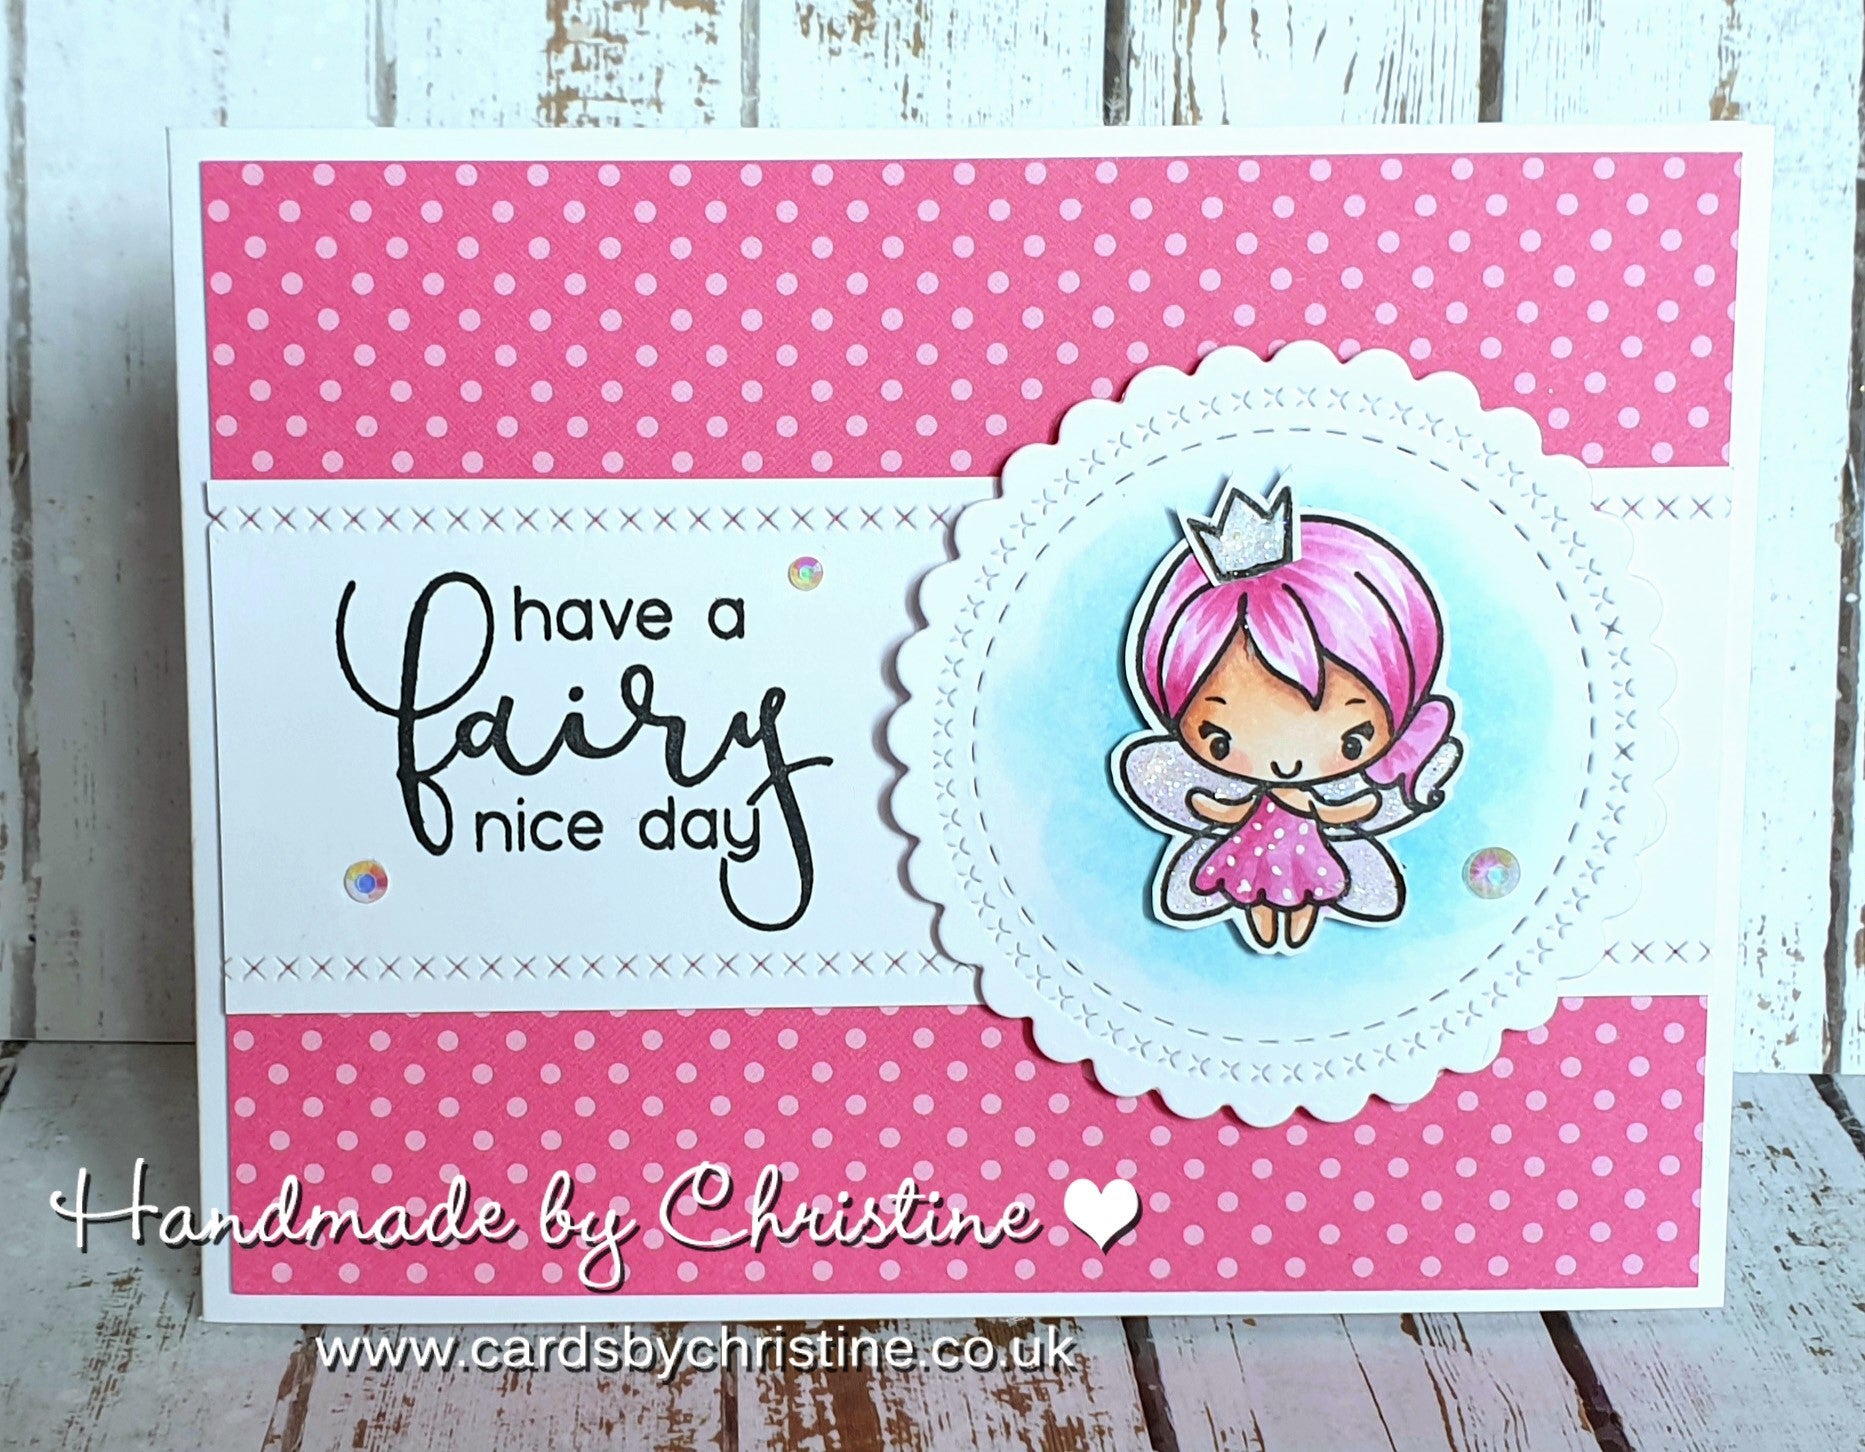 Guest Designer Christine wishes you a Fairy Nice Day!